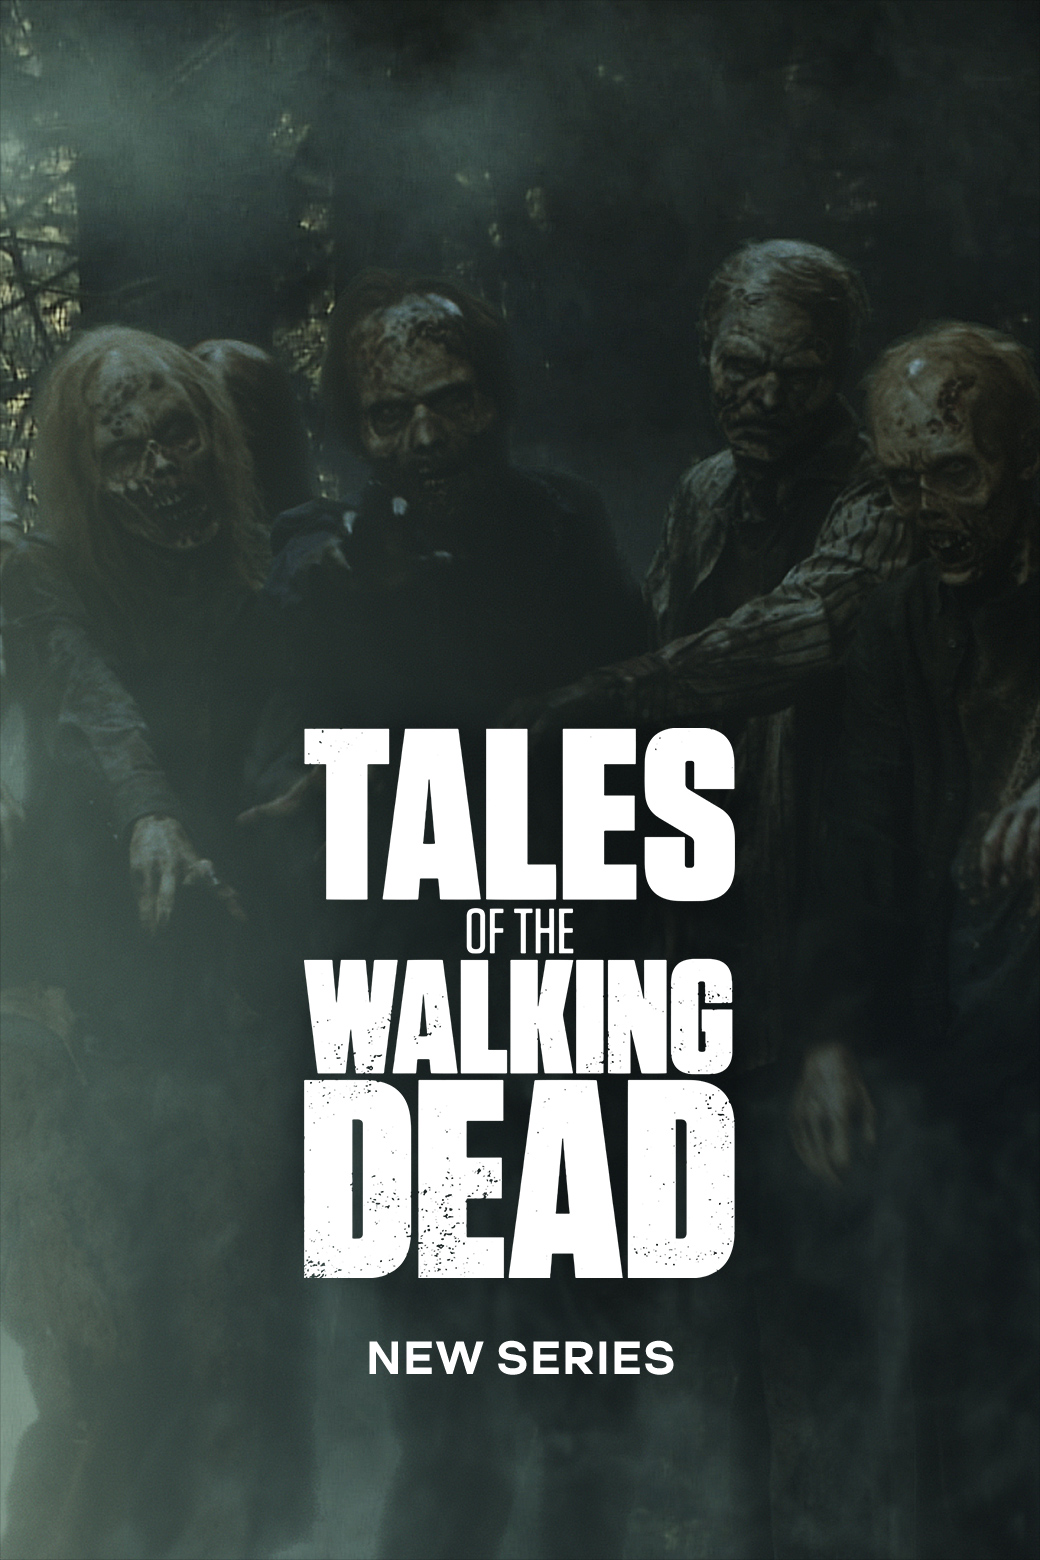 series_tms_SH000000000000_tales-of-the-walking-dead-s1__img_poster_2x3_v01